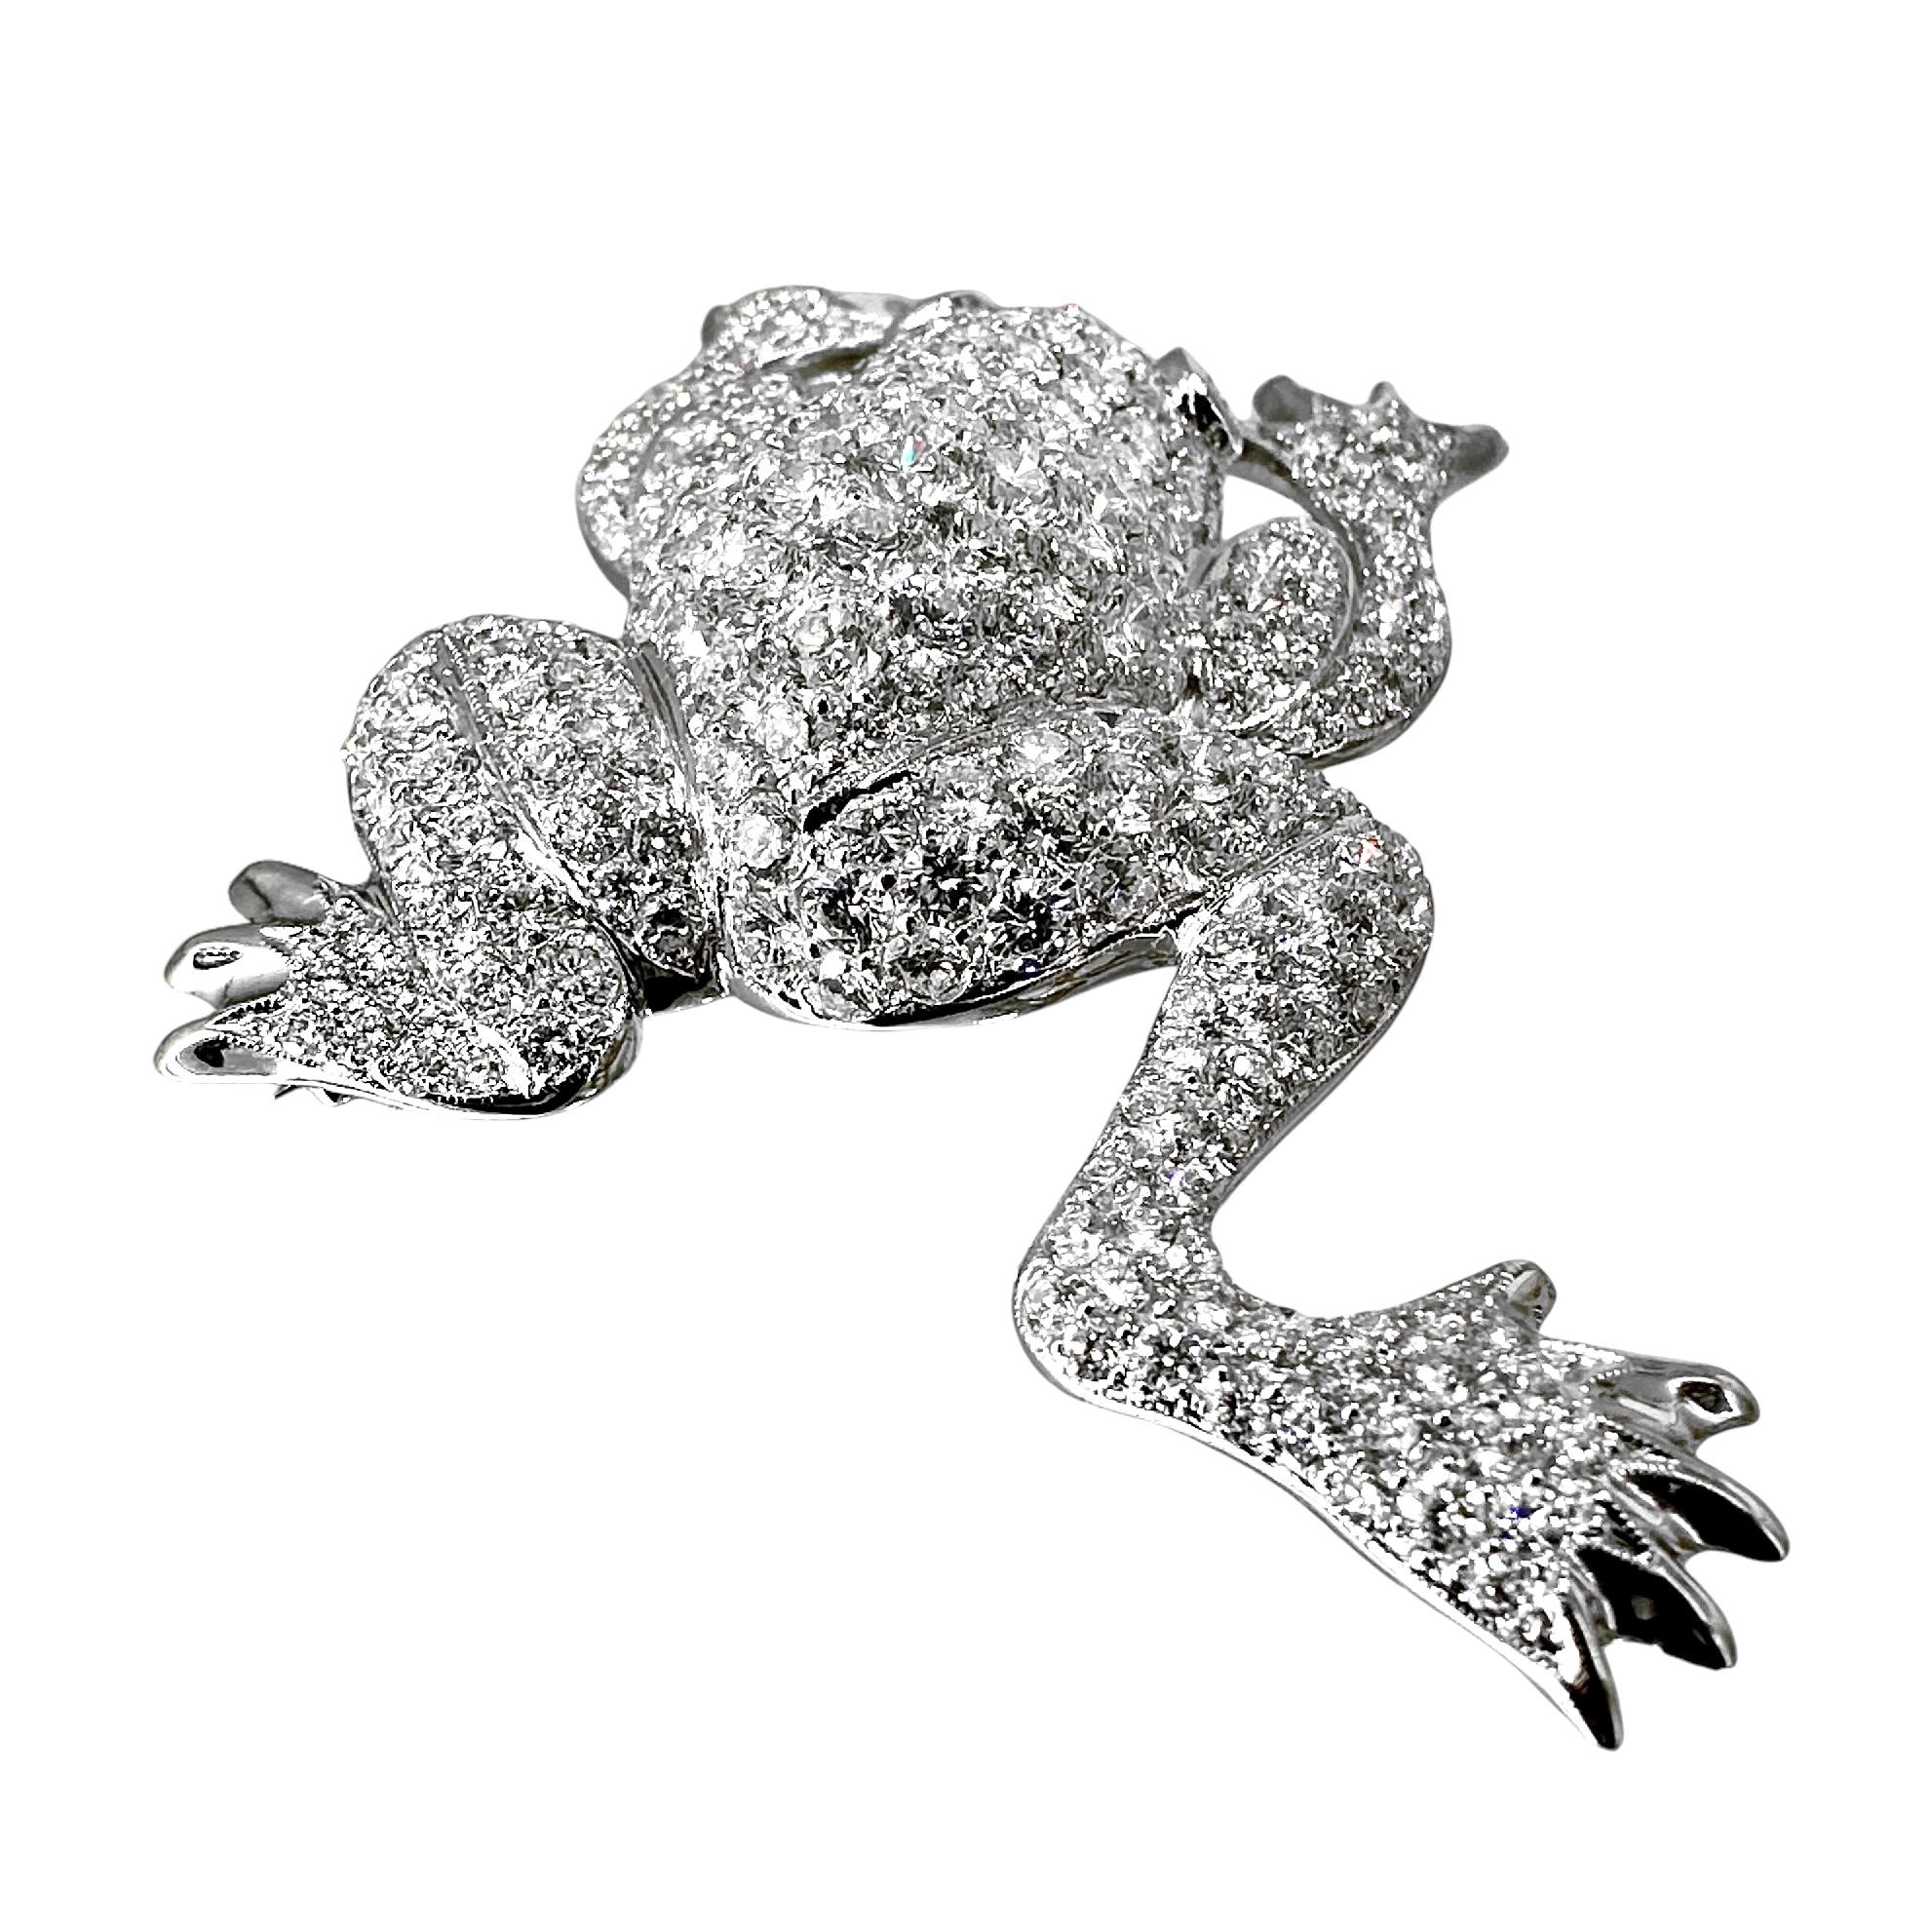 Modern Glittering 18k White Gold Diamond Encrusted Leaping Frog Brooch with 9.50cts For Sale